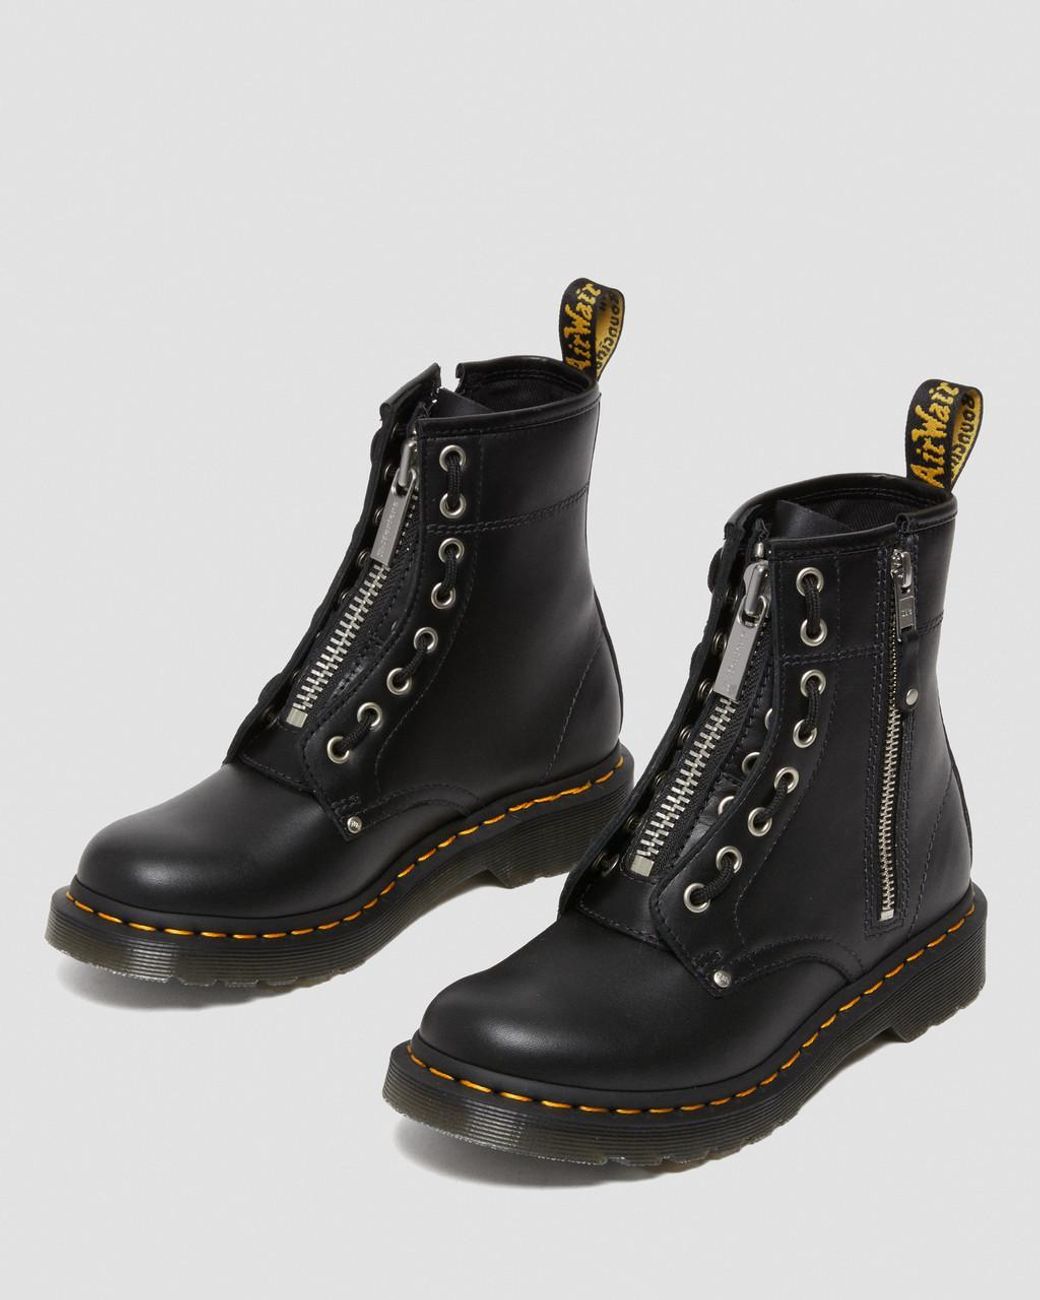 Dr. Martens 1460 Women's Double Zip Leather Lace Up Boots in Black | Lyst